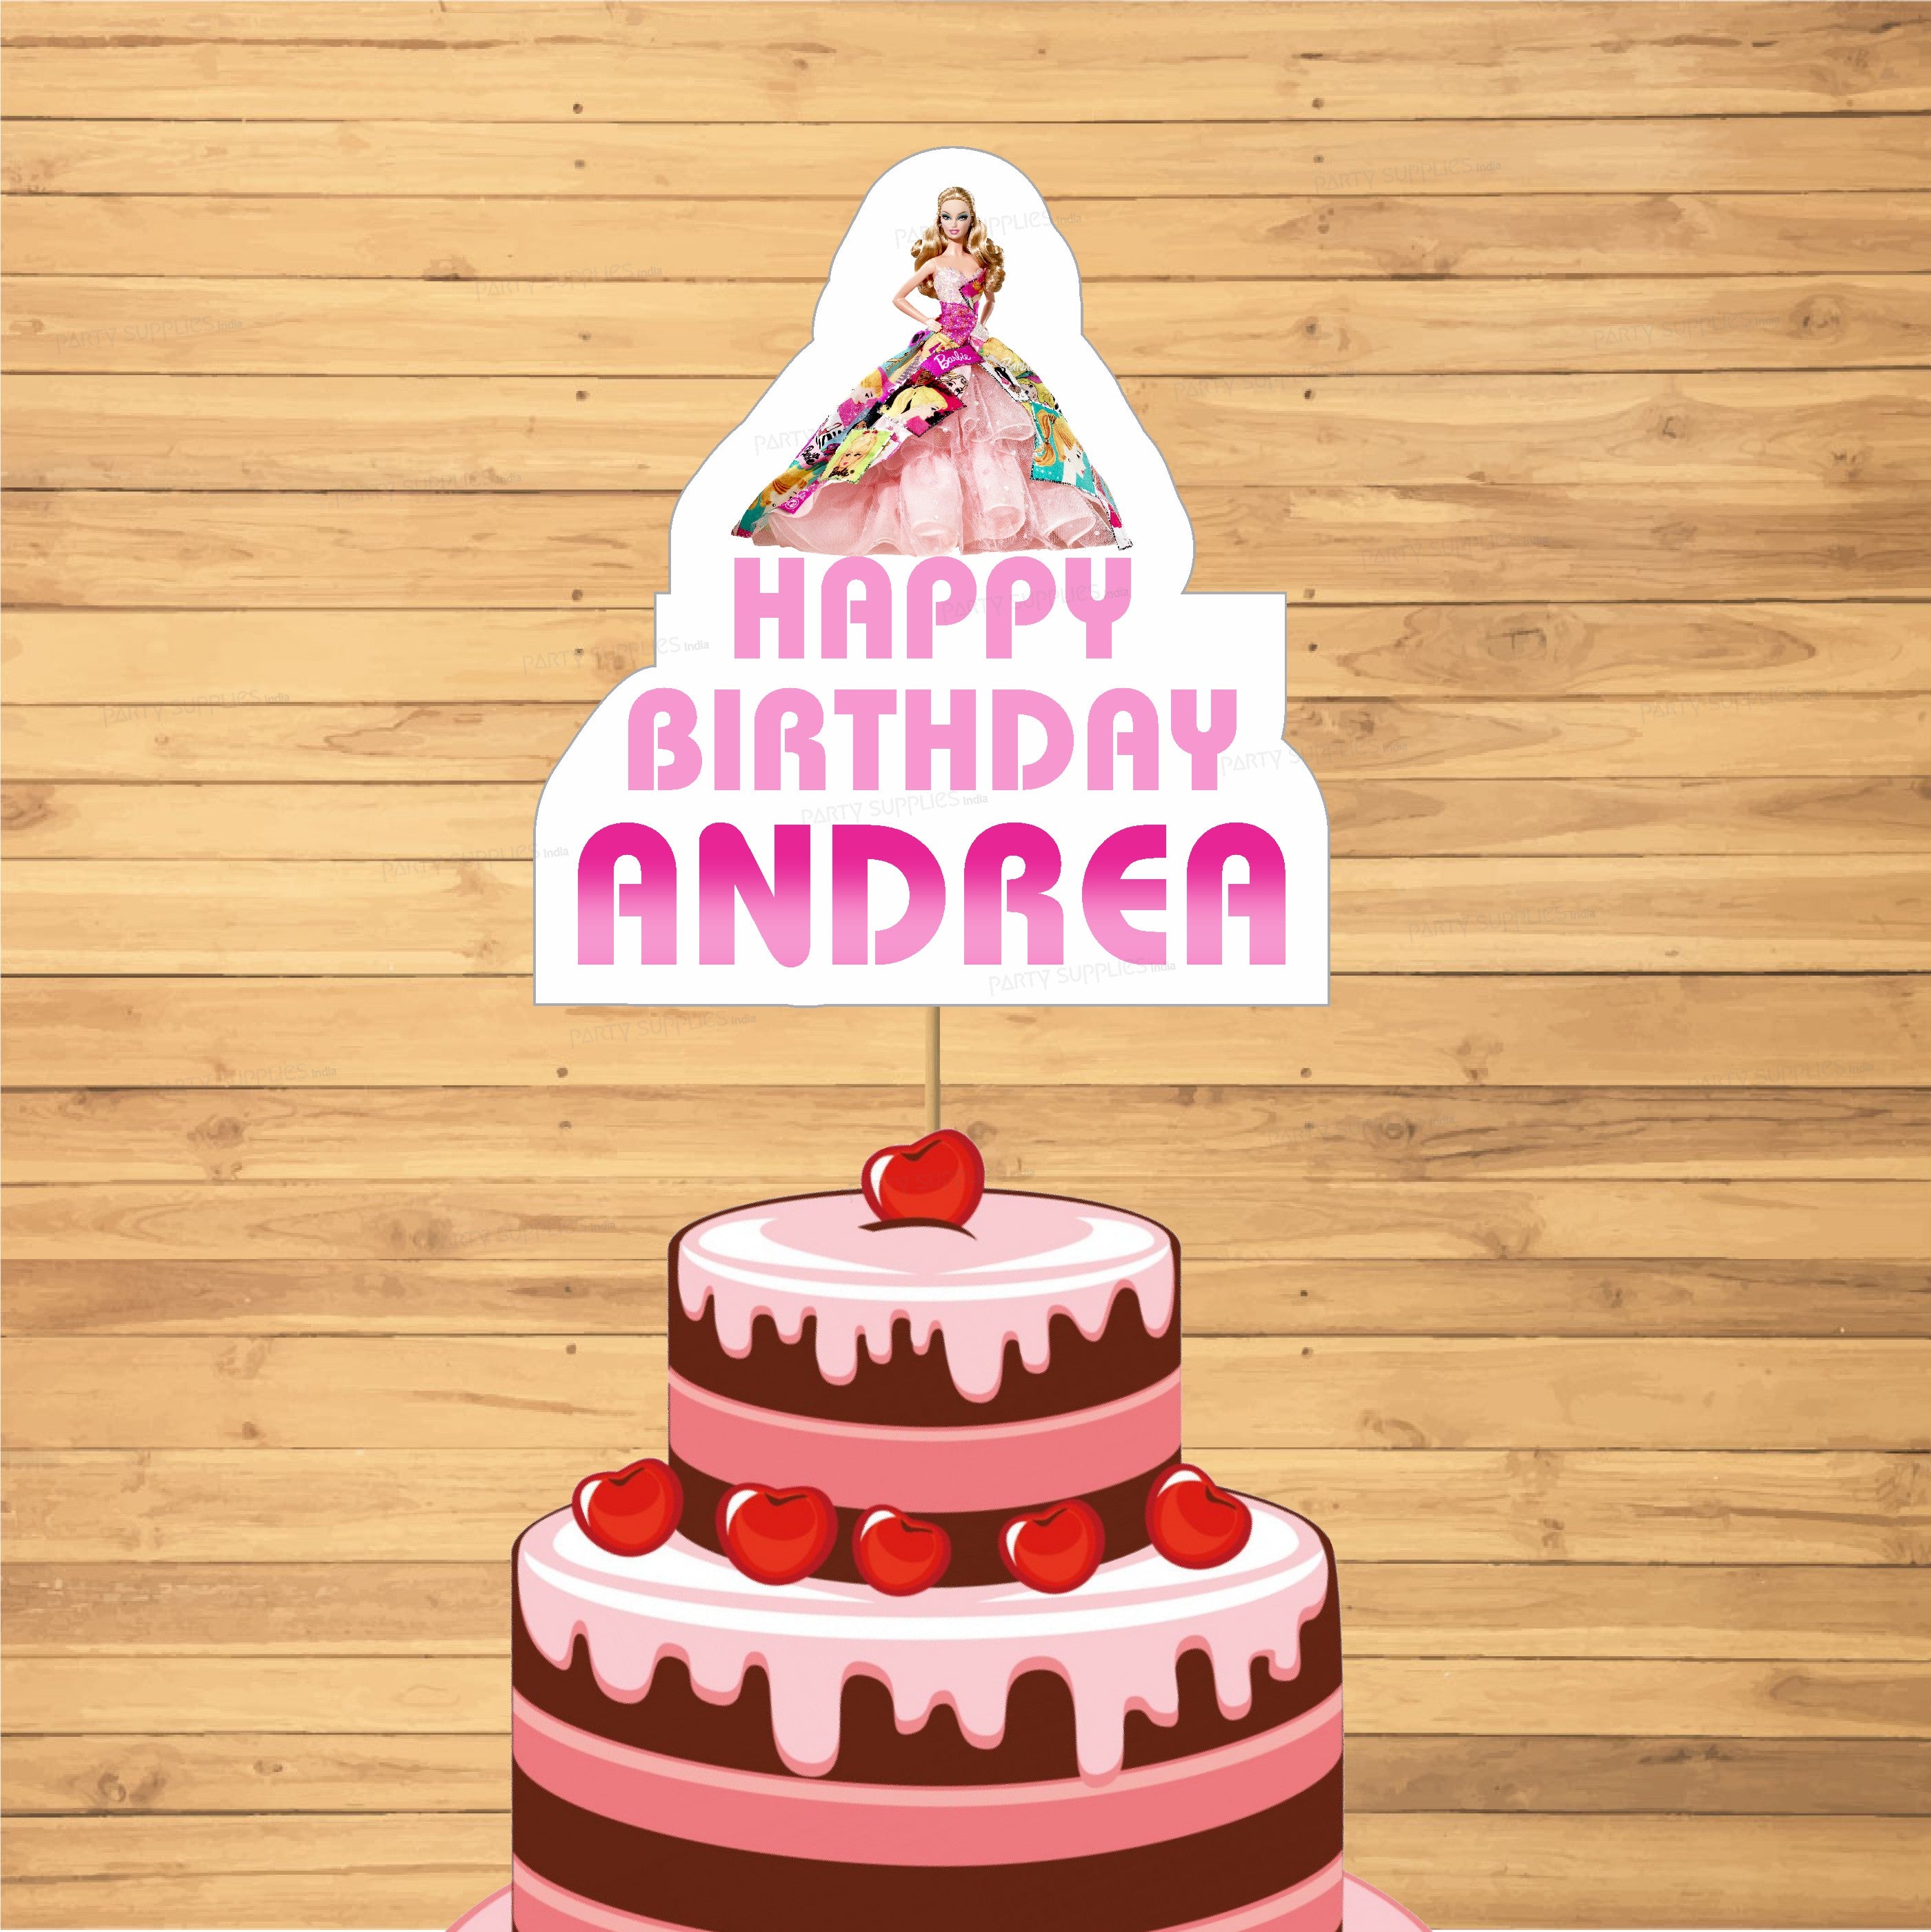 Barbie Theme Cake - Triple Layer in Madurai ,India from Blaack Forest  8489955500